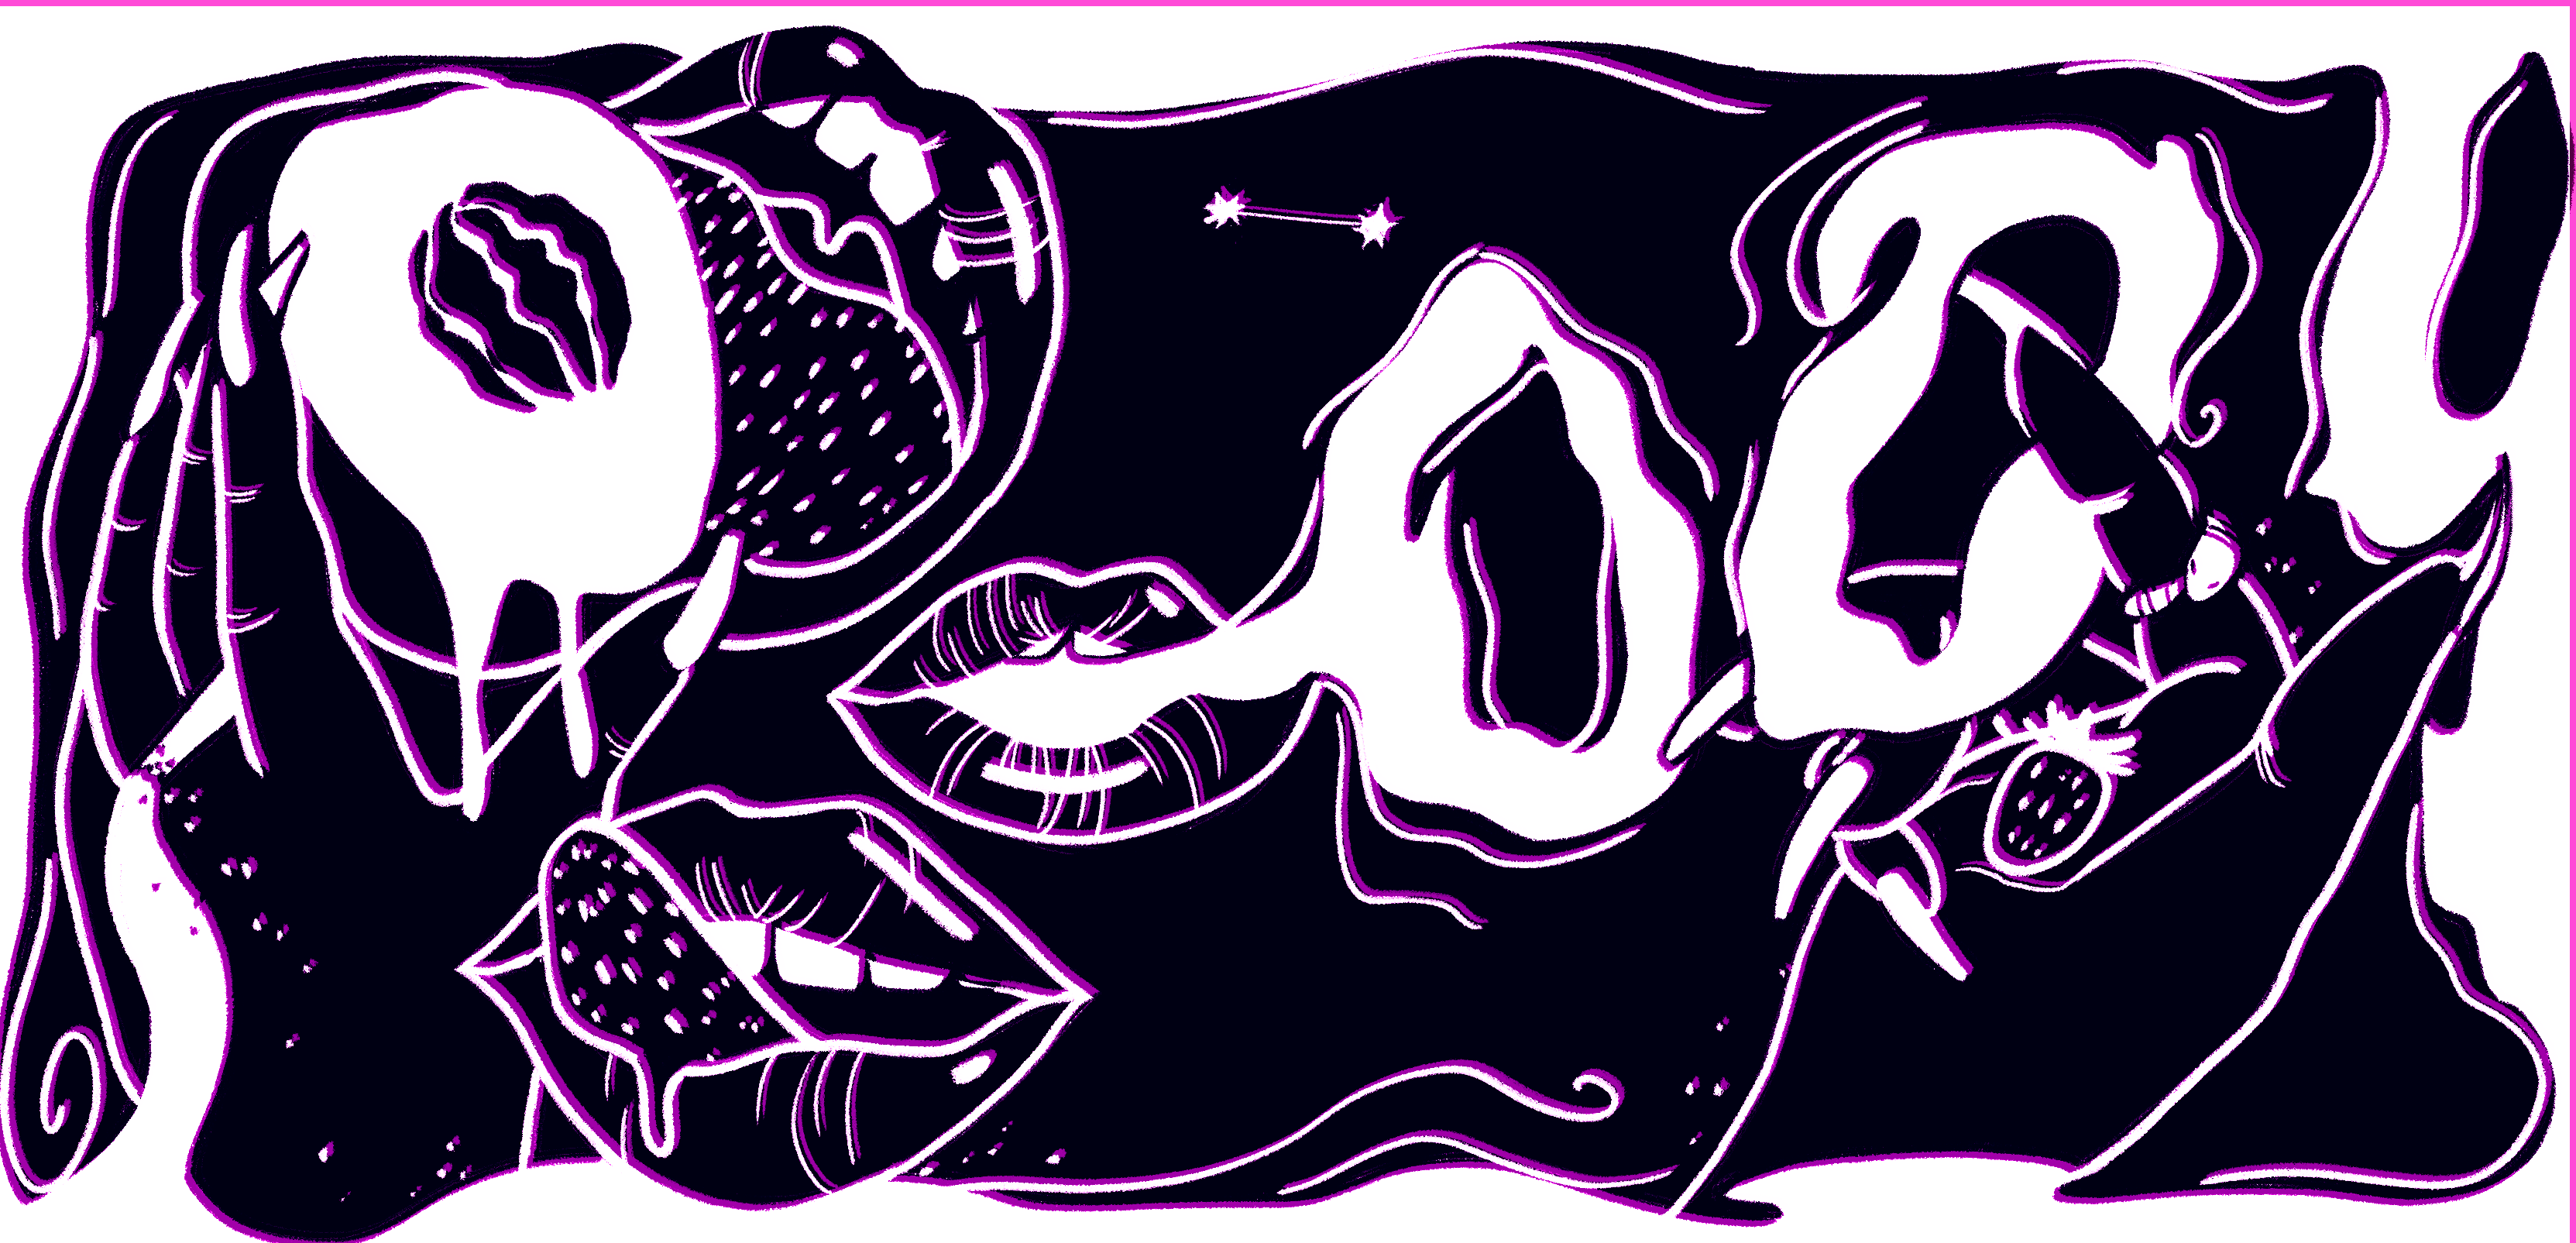 Image: A black-and-white illustration with purple highlights on the outline. Three pairs of lips, one licking its lips, one blowing smoke rings; the last biting into a peach held by a hand, with a cigarette between its fingers. The smoke rings expand to the right through another hand's splayed fingers, a strawberry in its palm. Illustration by Peregrine Bermas.